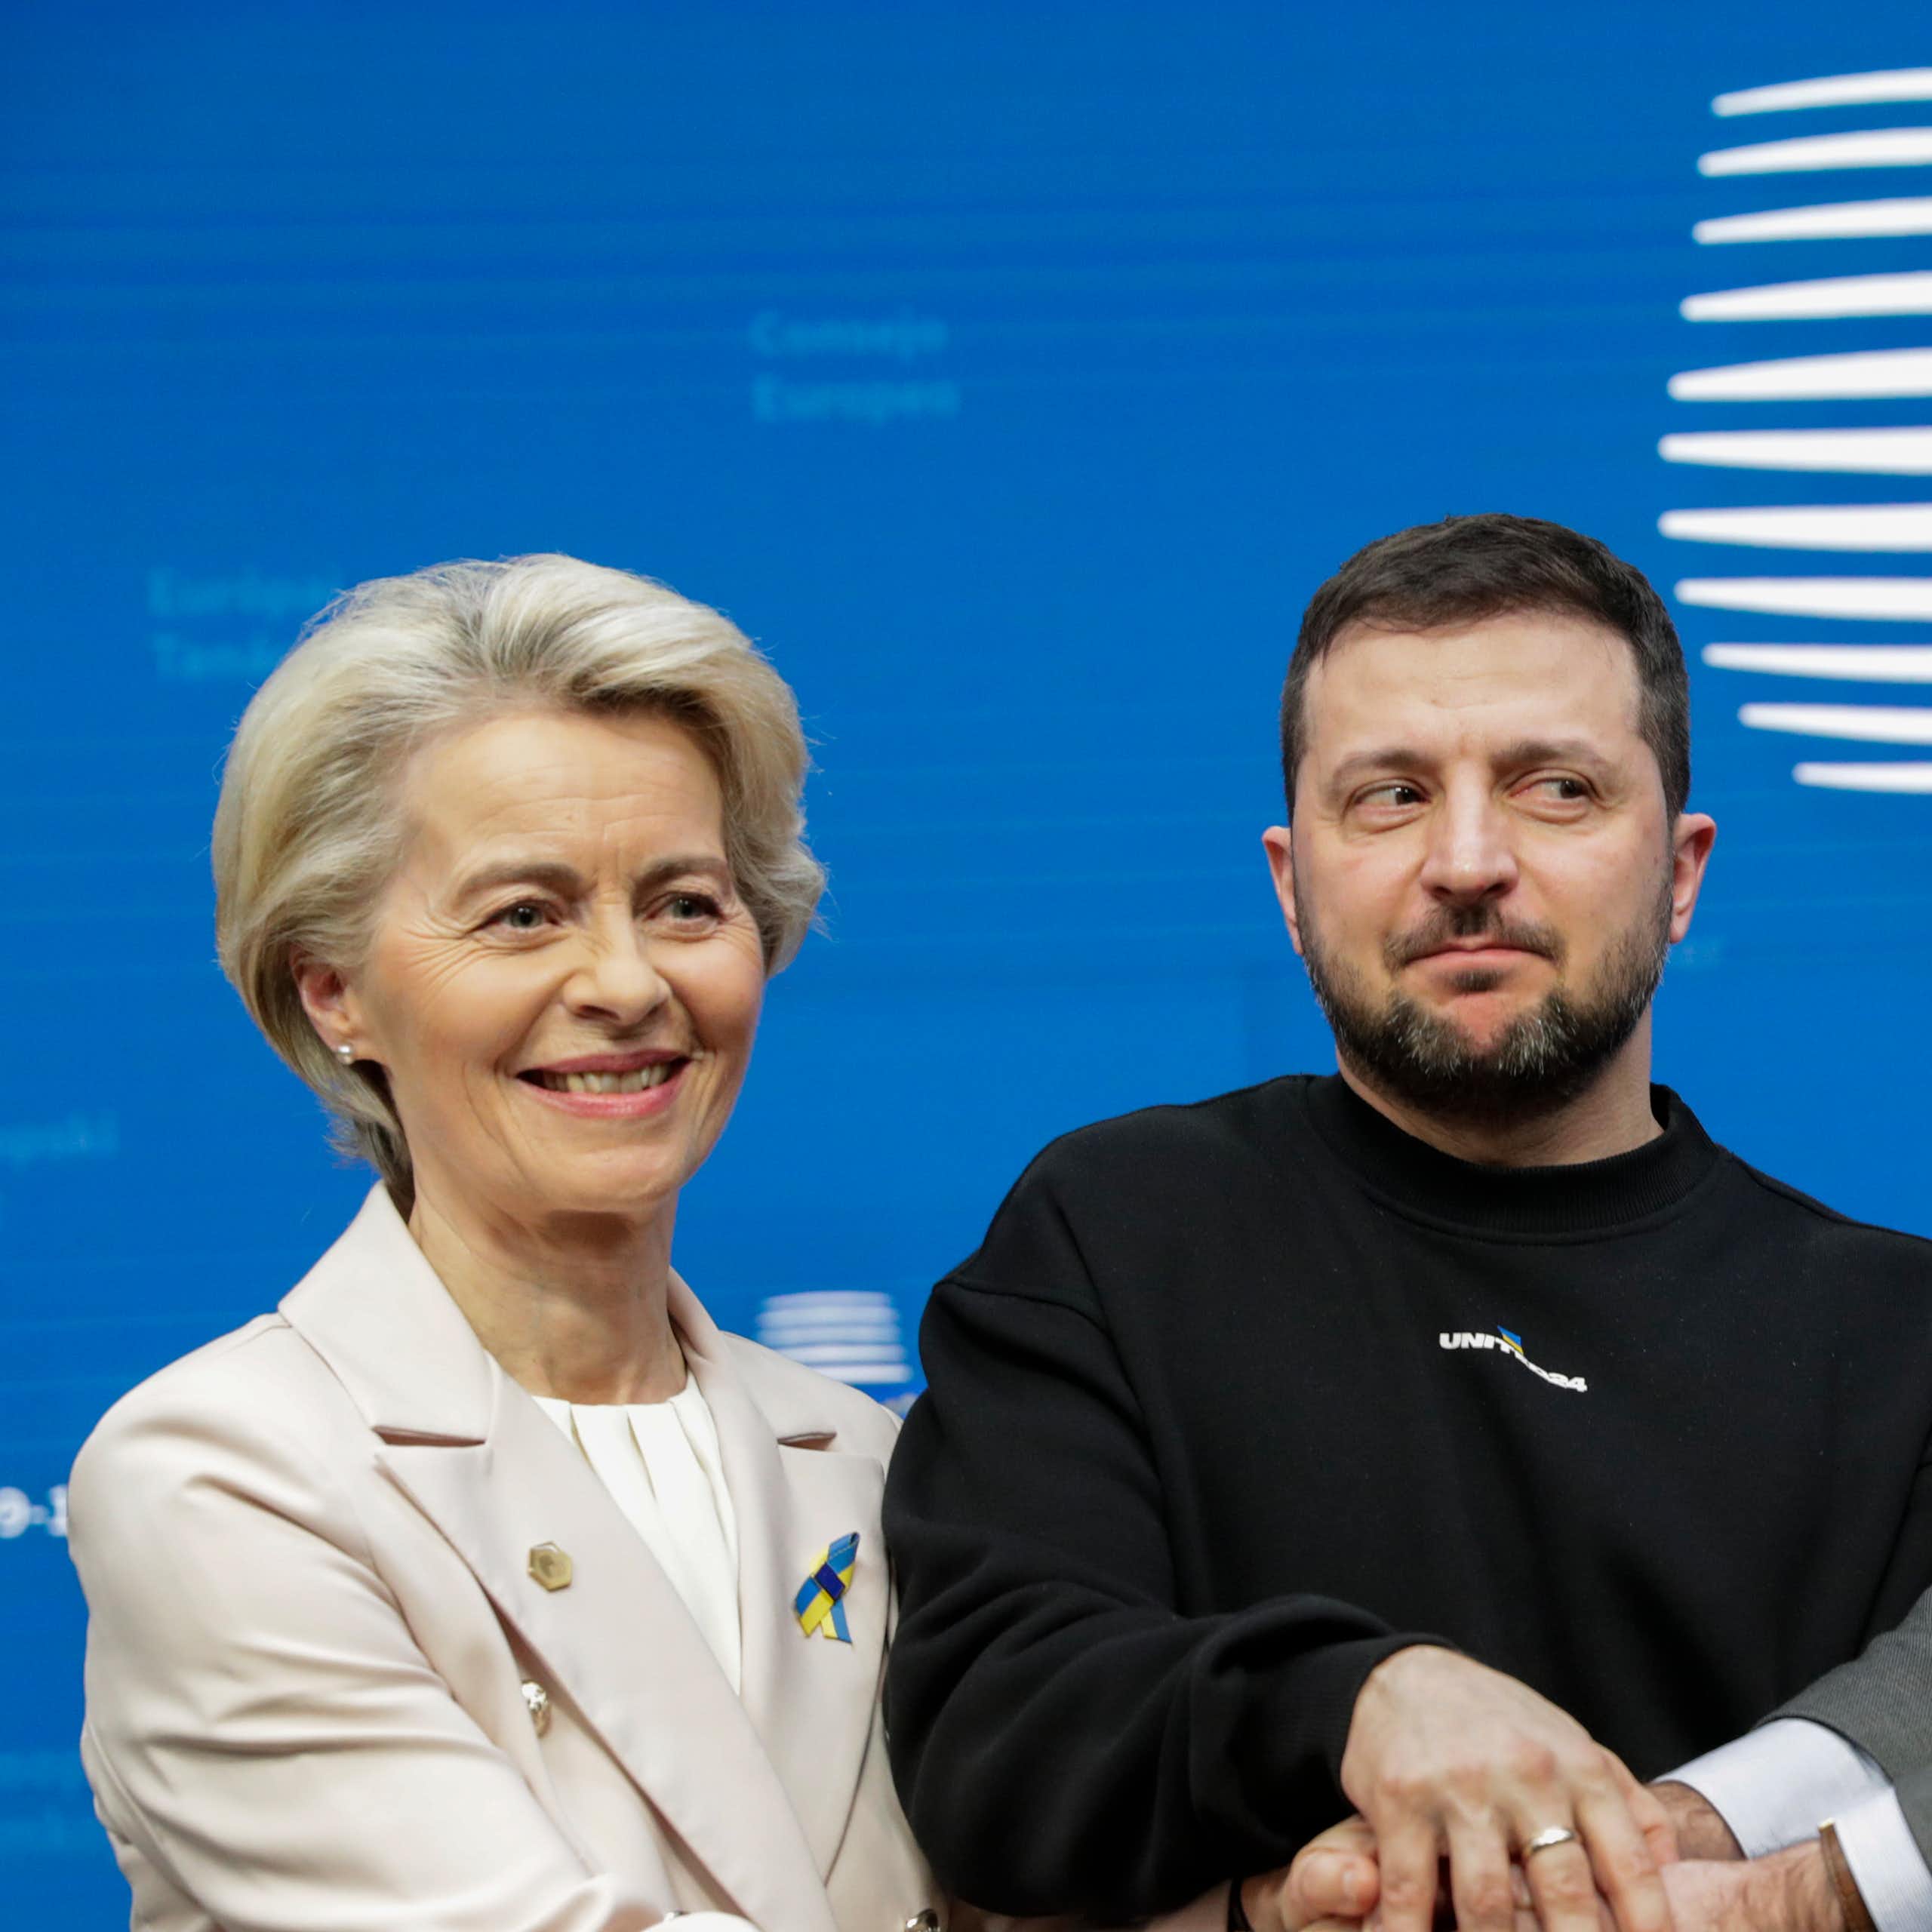 Ursula von der Leyen, Volodymyr Zelensky and Charles Michel clasping hands at a press conference